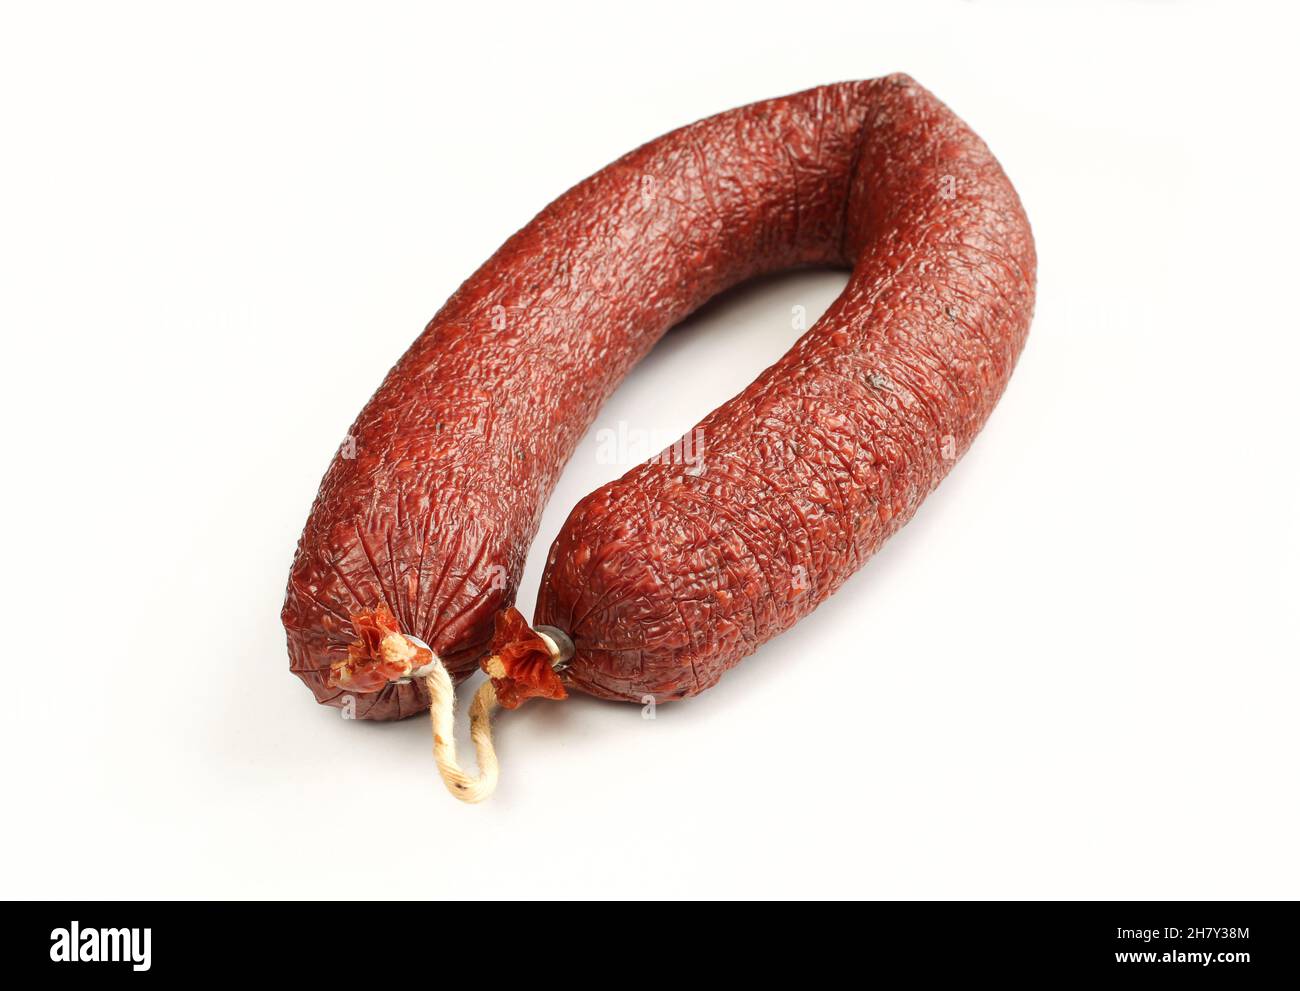 Smoked beef sausage isolated on white background. Delicious traditional meat Stock Photo